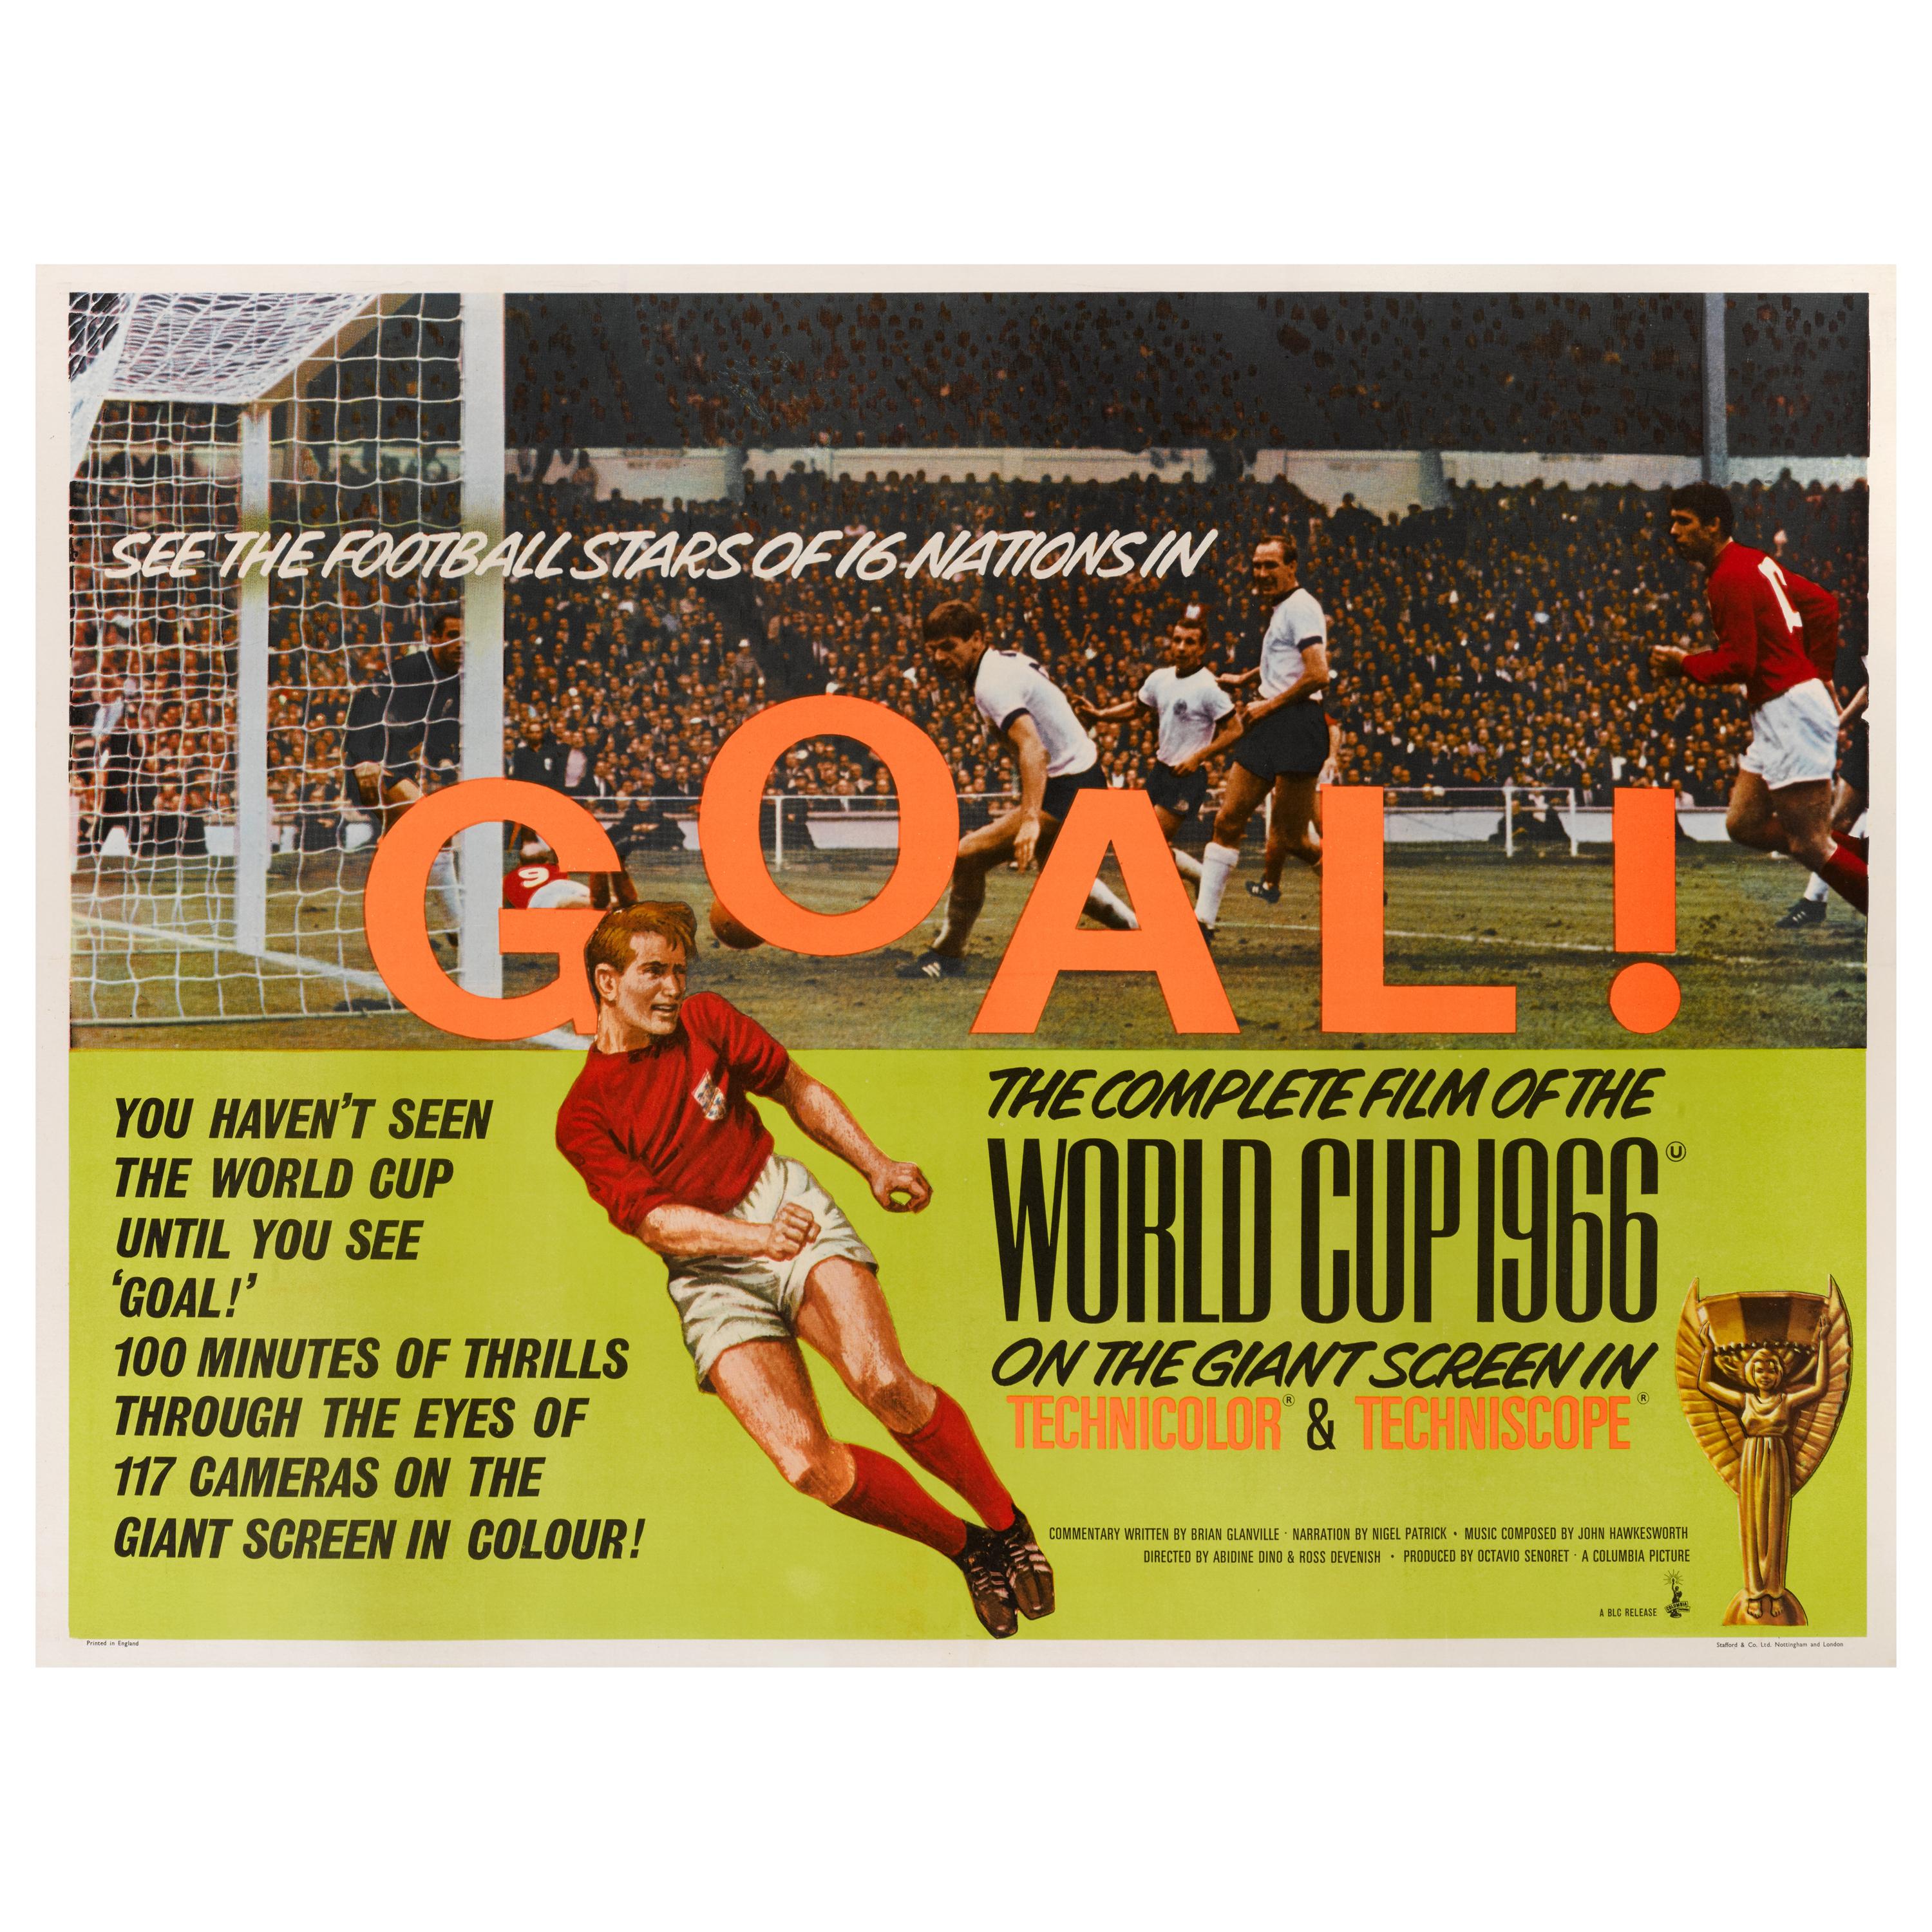 Goal! The World Cup